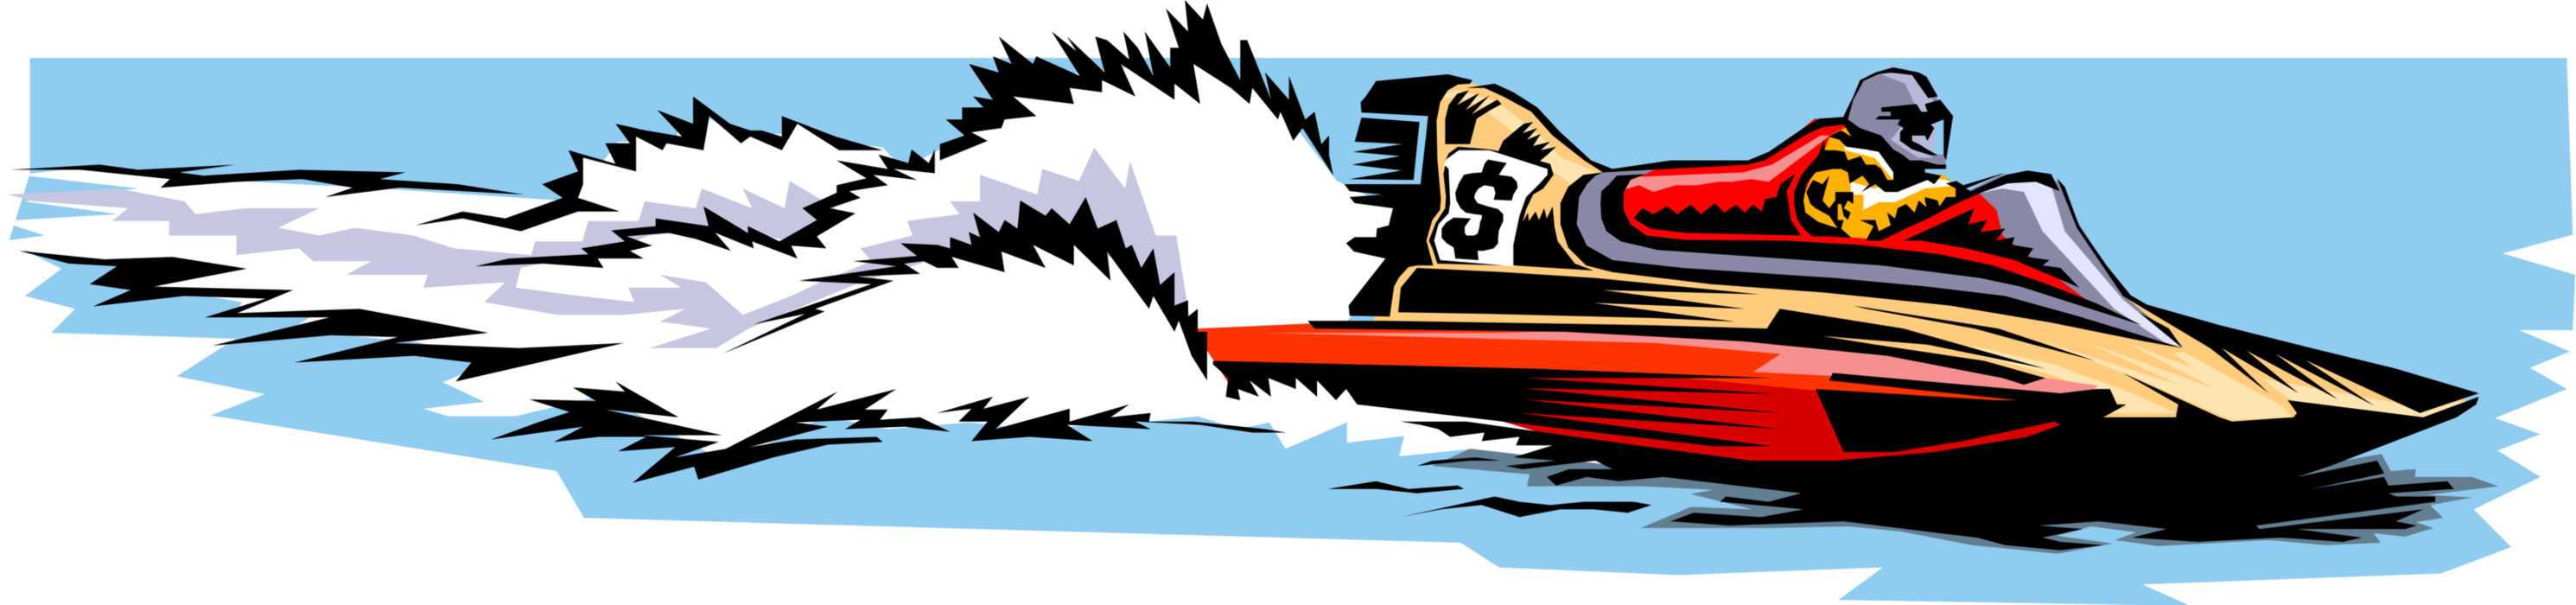 Vector Illustration of Motorboat Racing Competition for Inshore Powerboat Speedboats